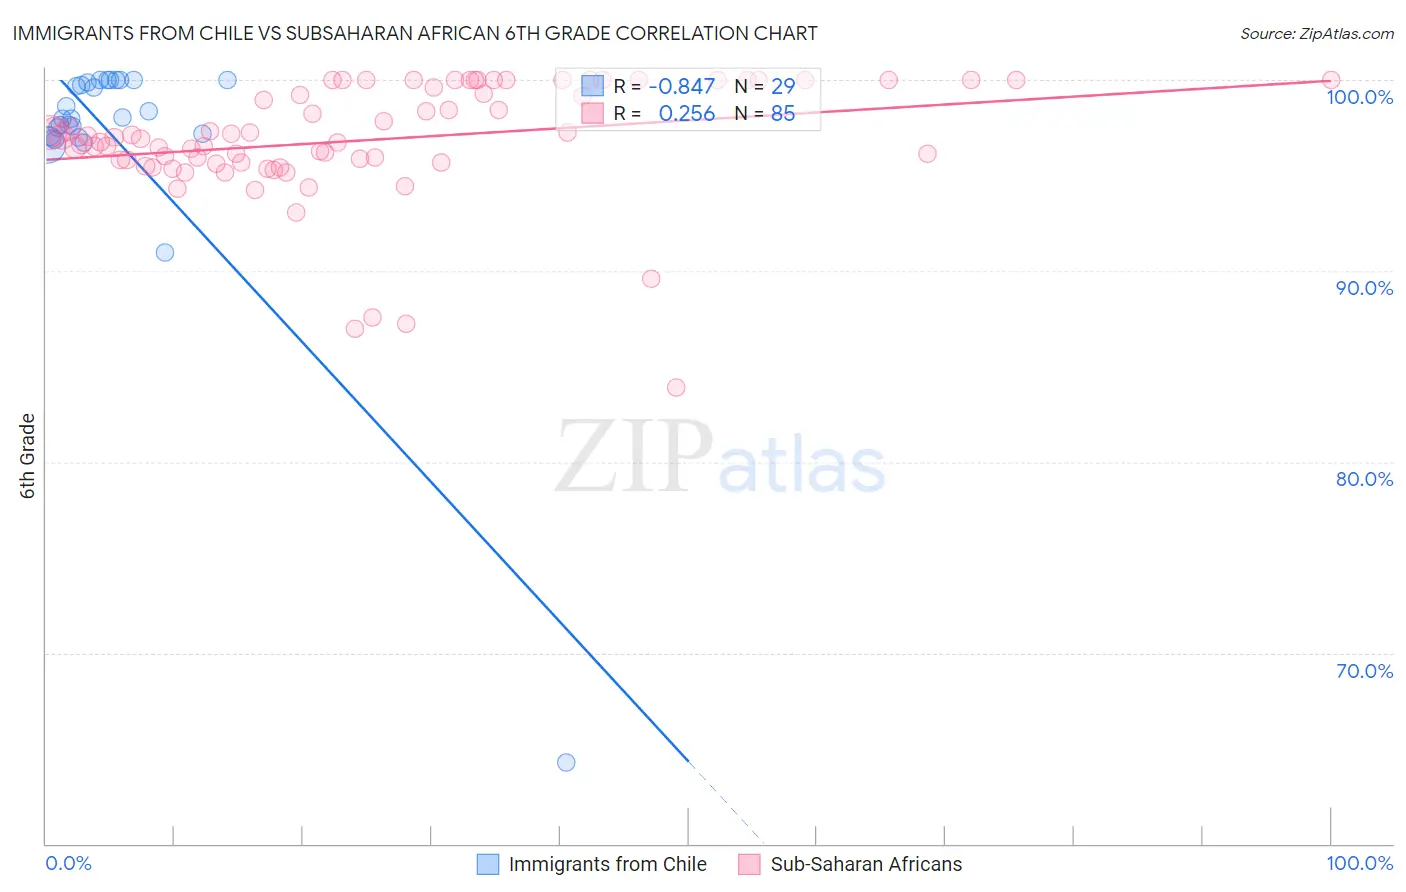 Immigrants from Chile vs Subsaharan African 6th Grade